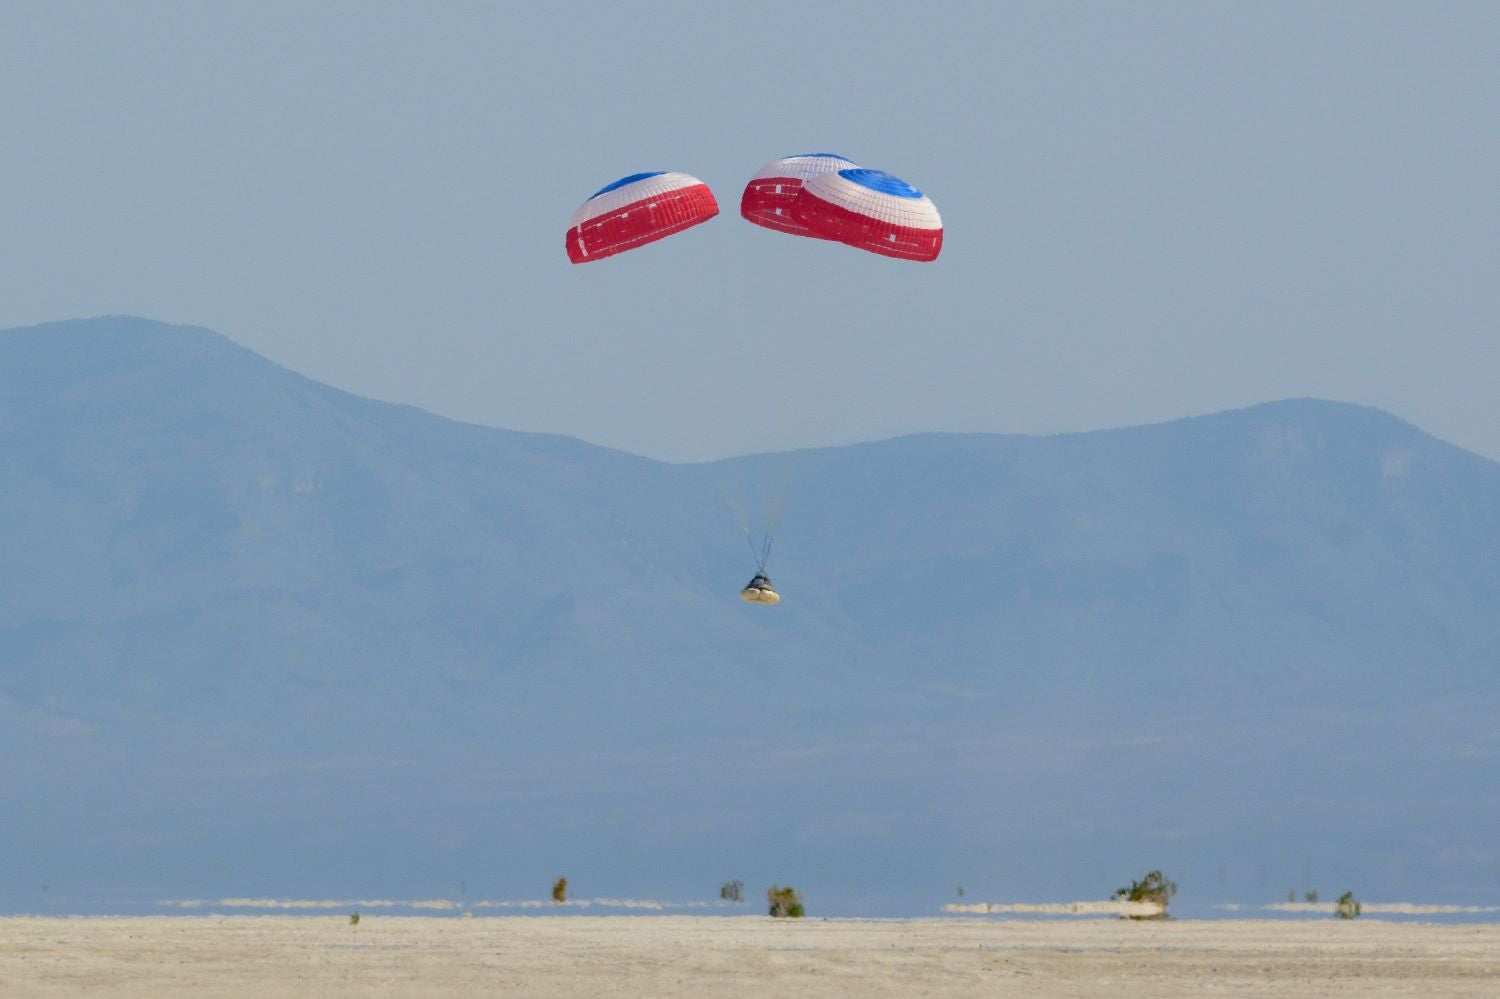 A parachute slows a Boeing space capsule above the New Mexico desert.